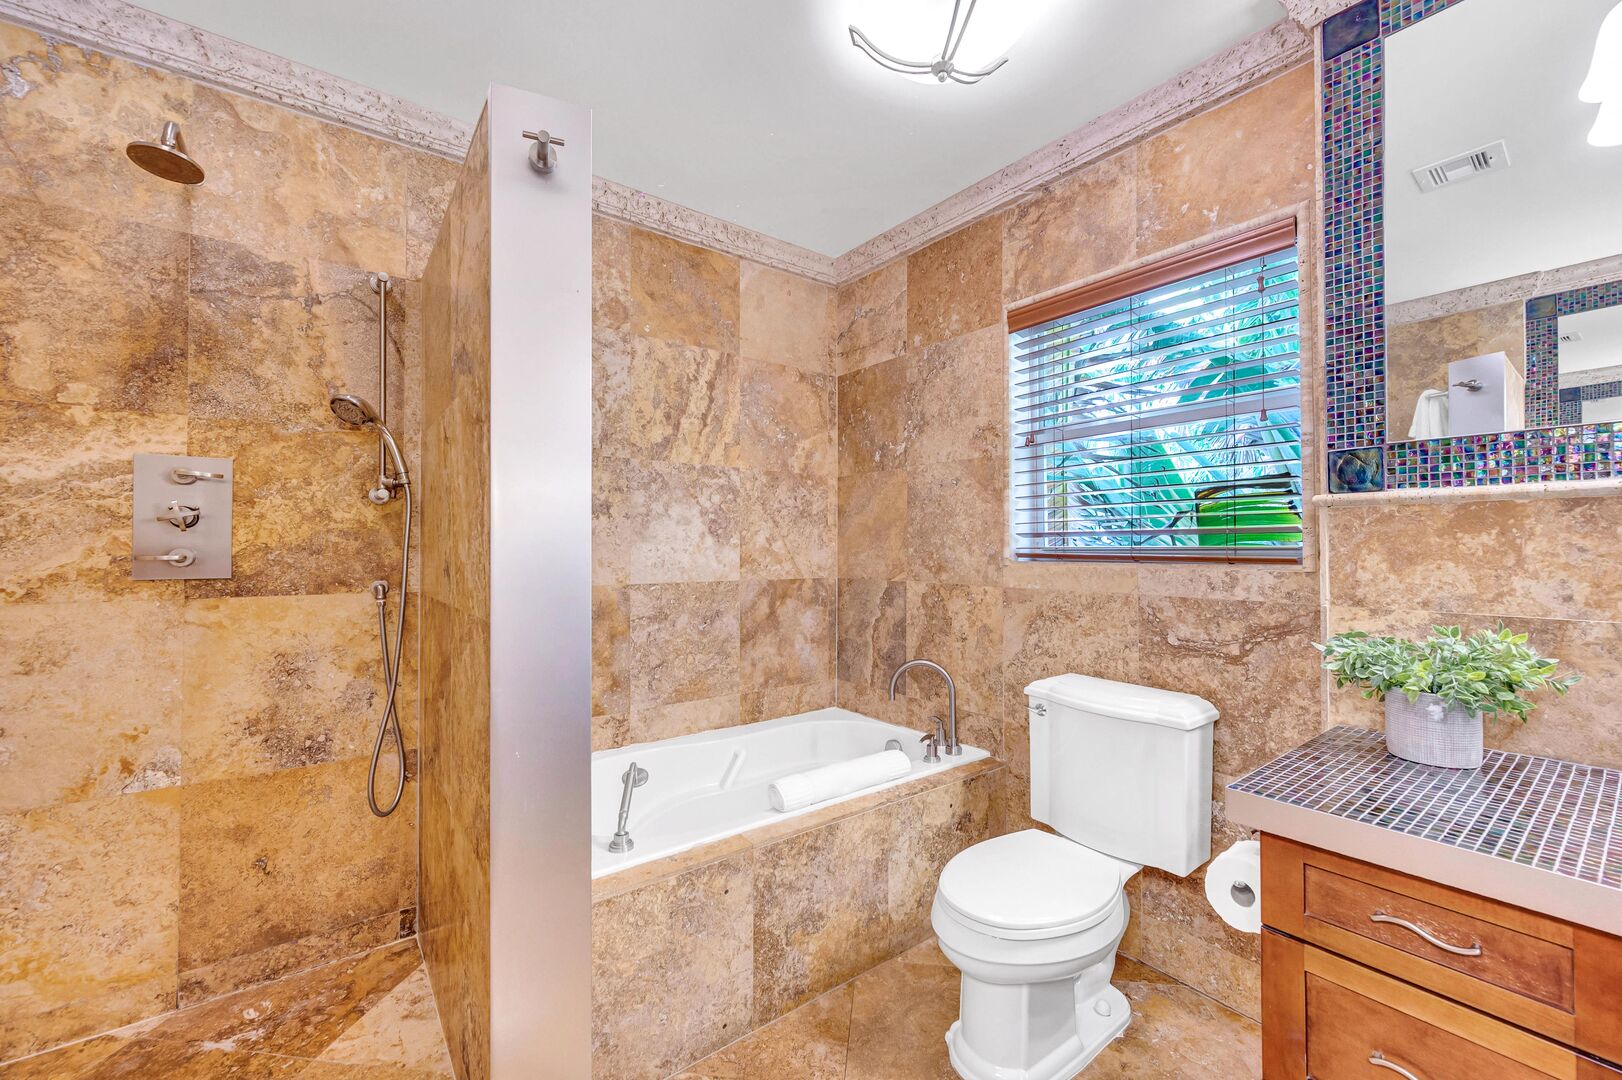 The master bedroom's bathroom features a walk-in shower and a tub.